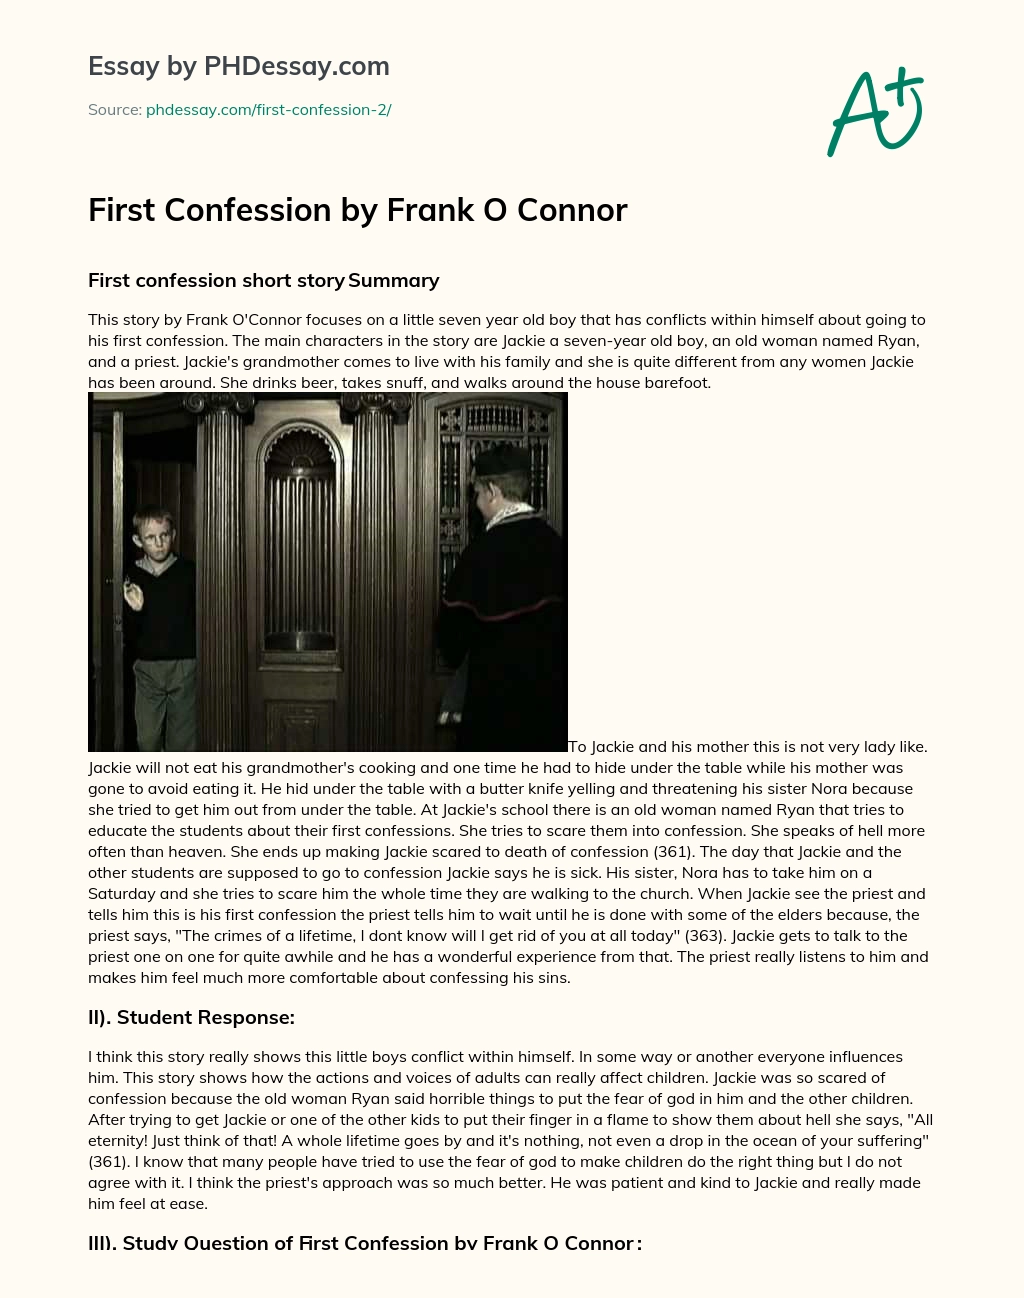 First Confession by Frank O Connor essay